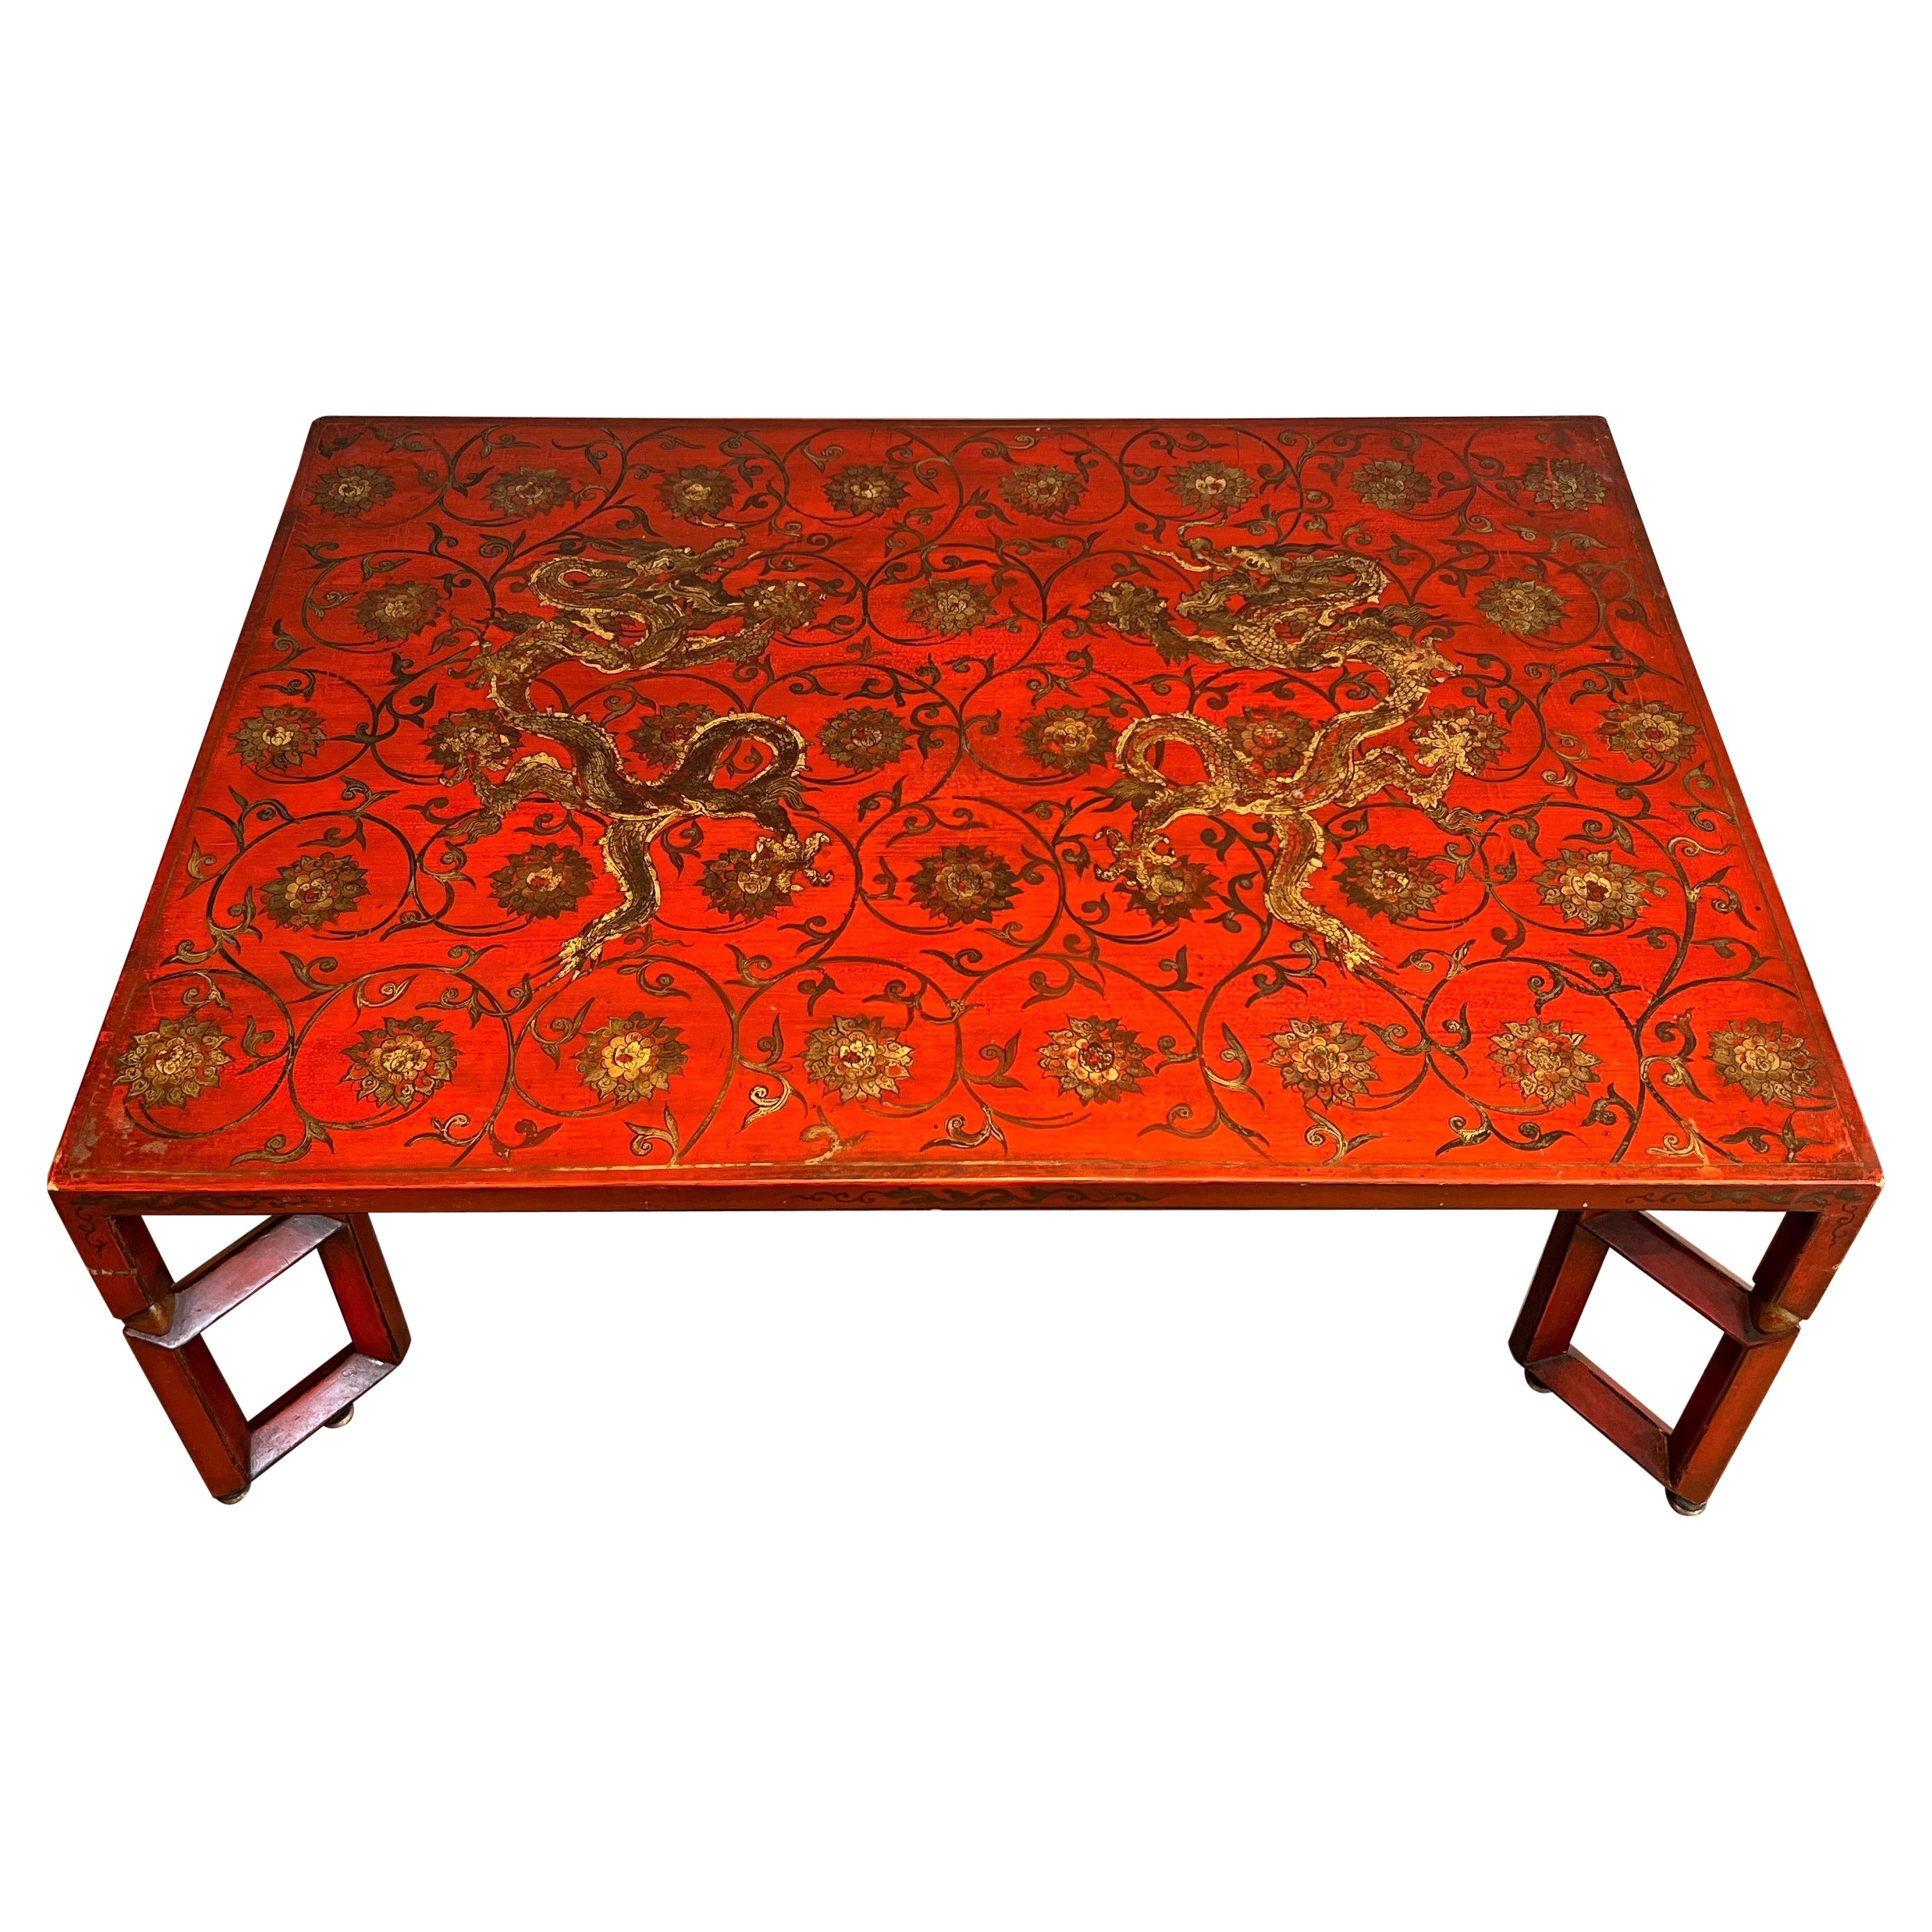 Large Red Lacquered Coffee Table with Gold Chinese Decorations